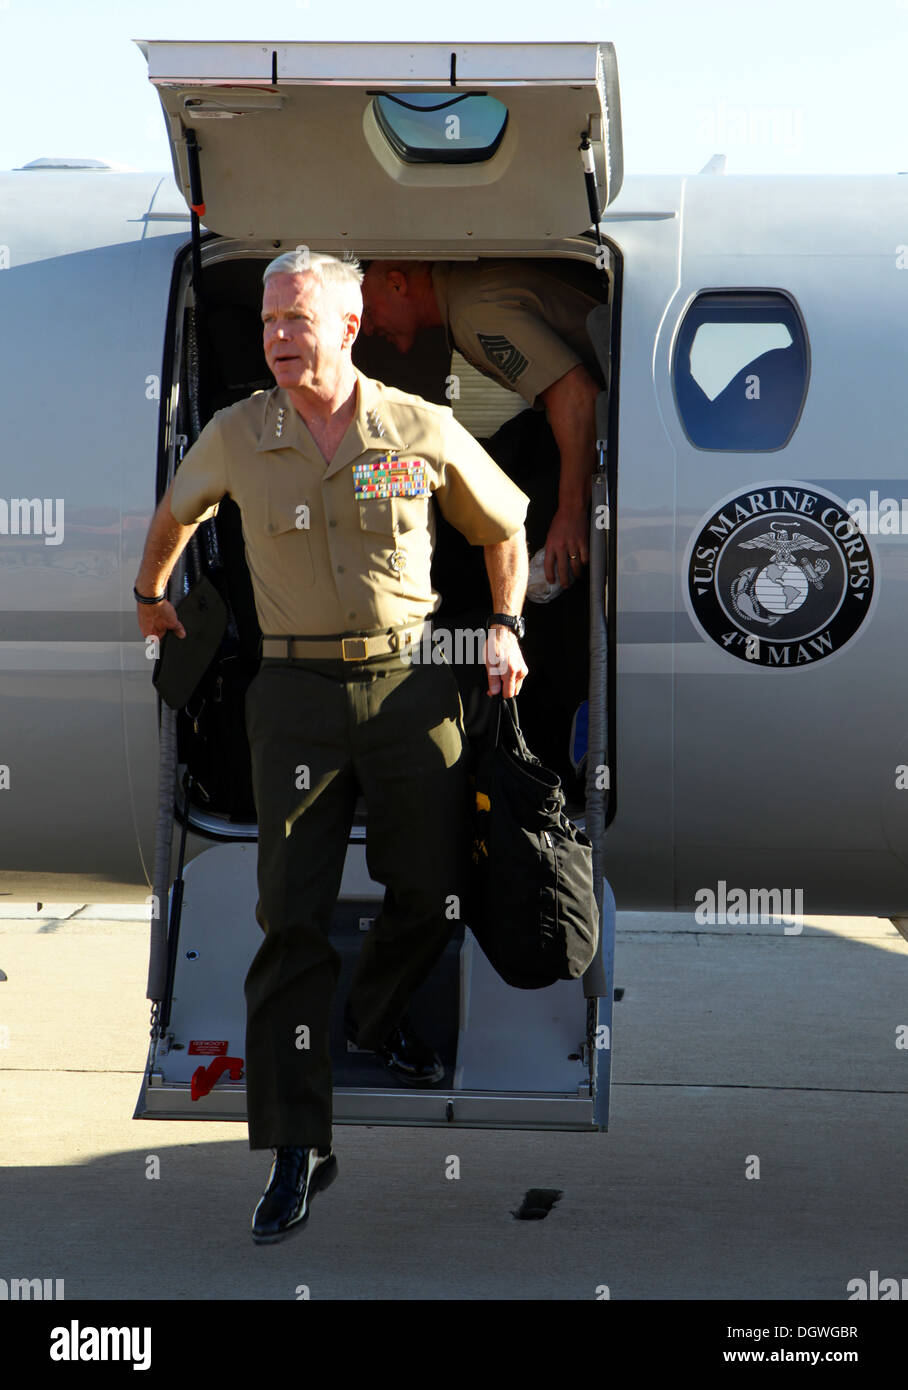 The 35th commandant of the Marine Corps, General James F. Amos, and the 17th sergeant major of the Marine Corps, Sgt. Maj. Micheal P. Barrett, arrive at Marine Corps Air Station Miramar, San Diego, Calif., Oct. 18, 2013. Stock Photo